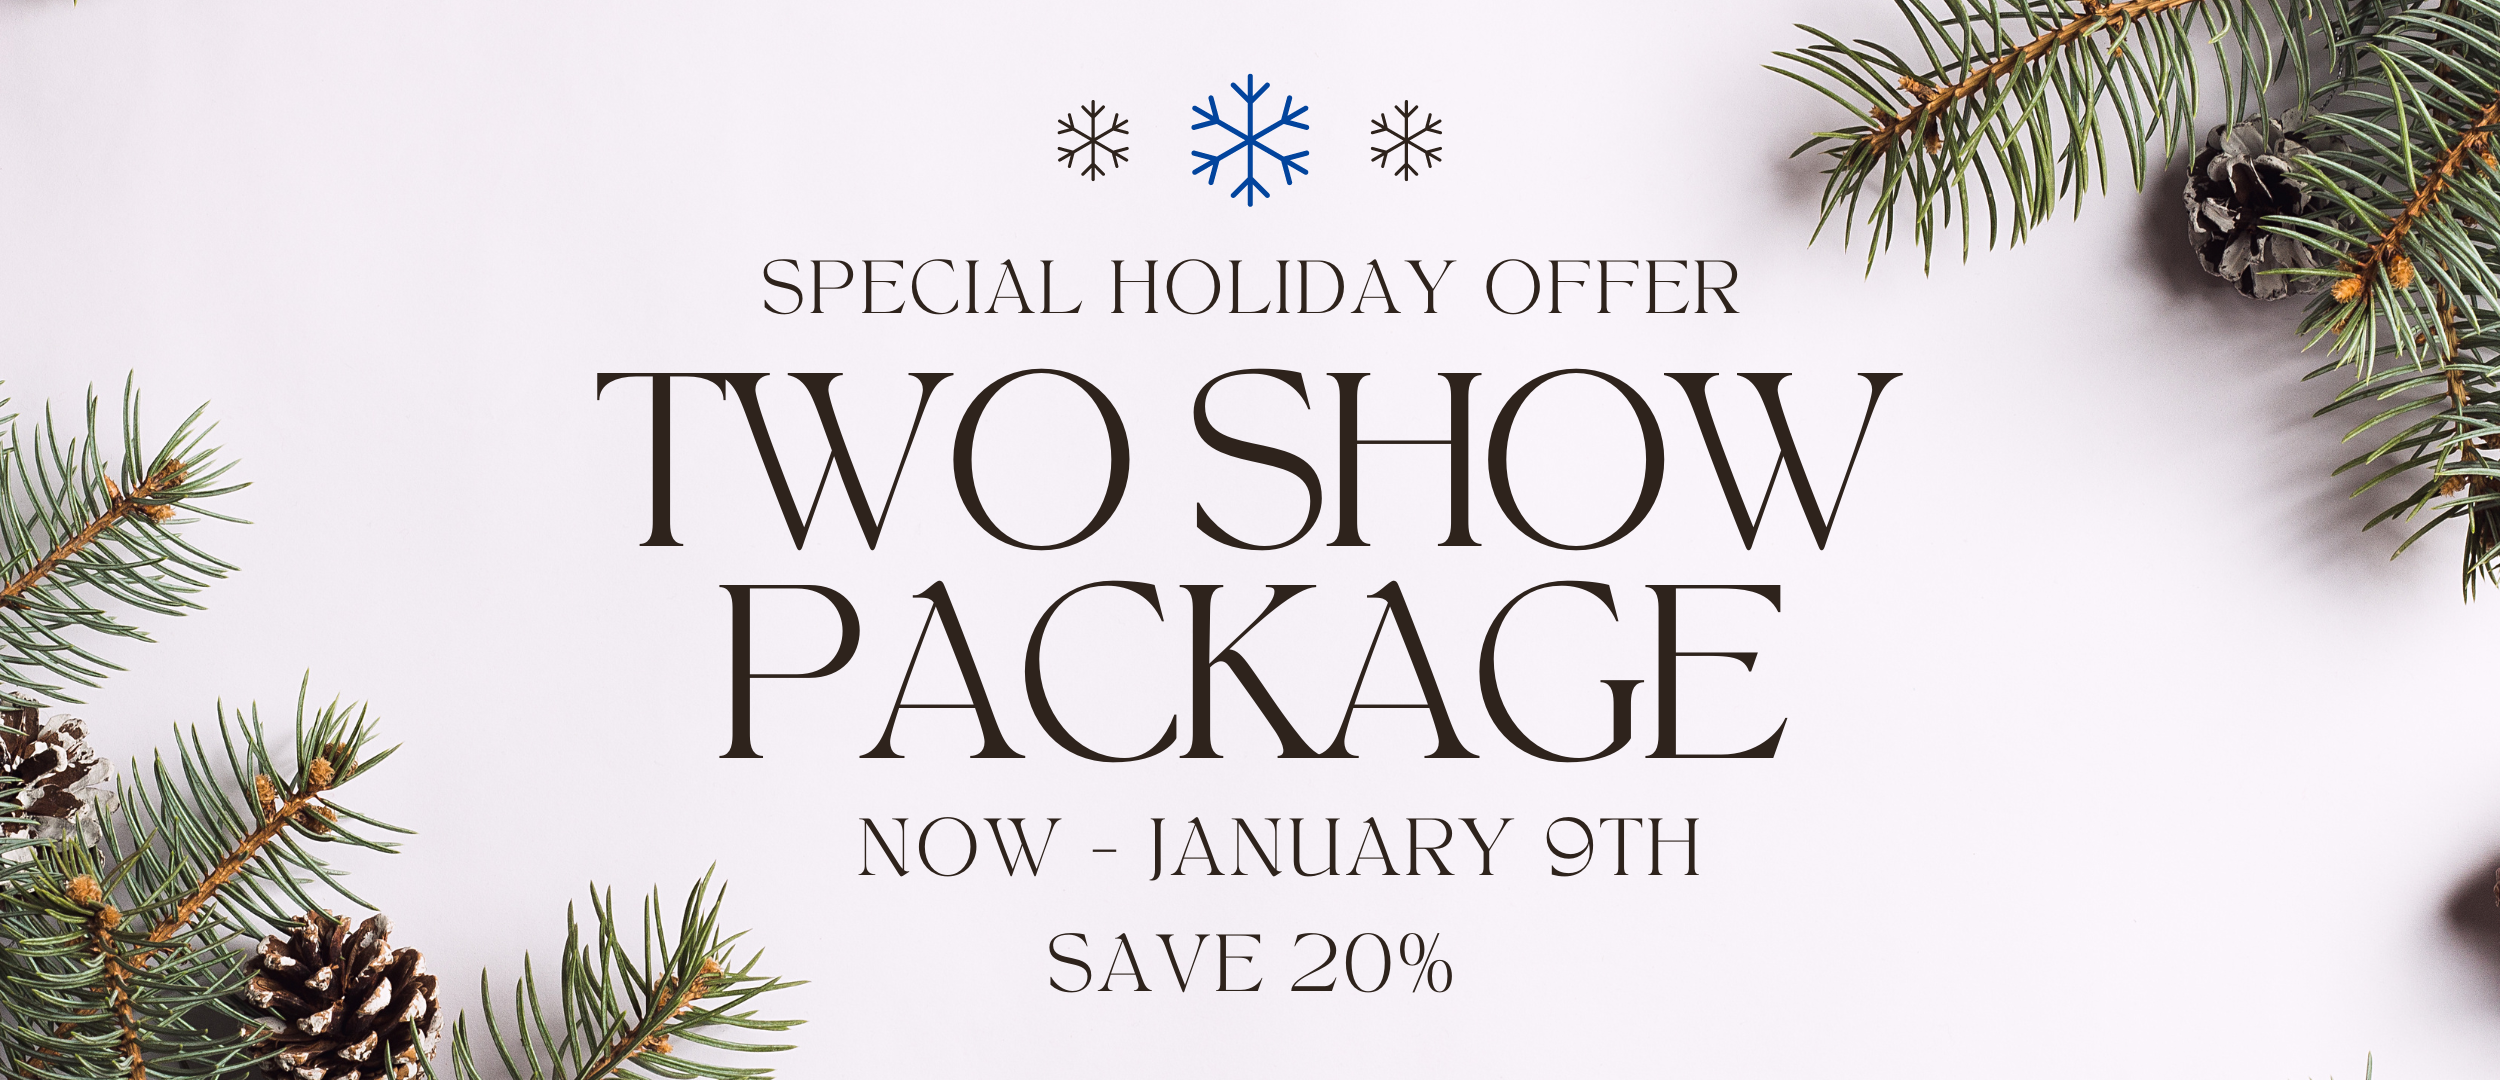 Two Show Package Deal Save 20%